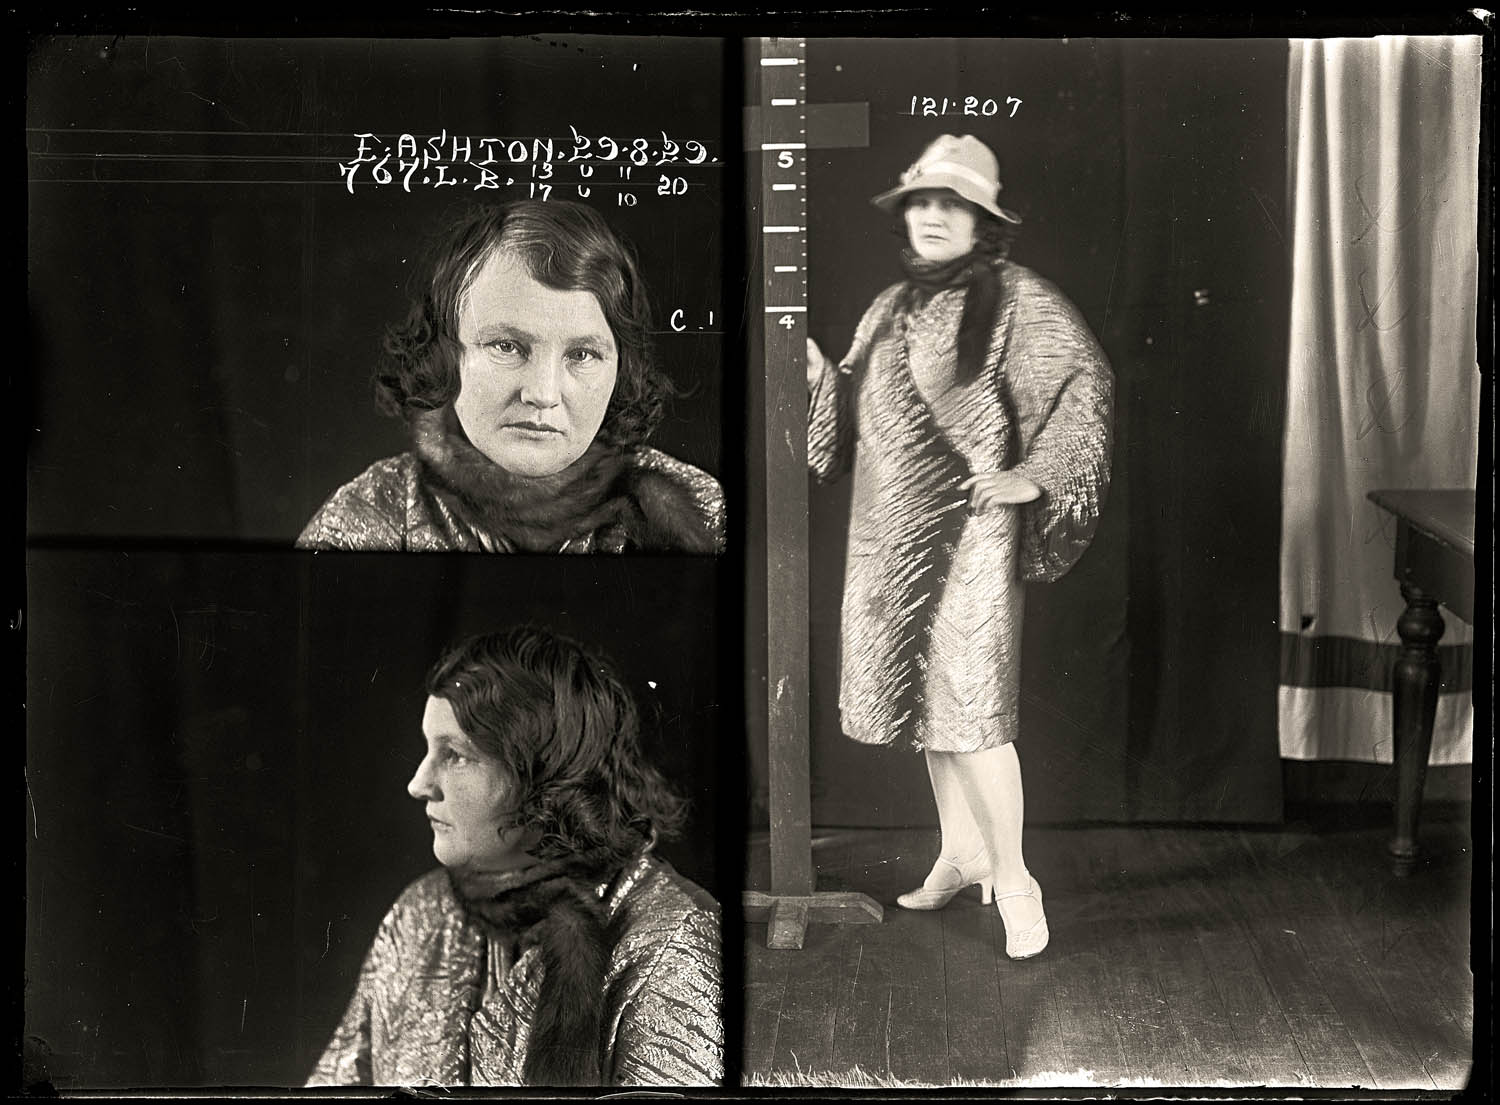 Edith Florence Ashton, criminal record number 767LB, 29 August 1929. State Reformatory for Women, Long Bay, NSW 